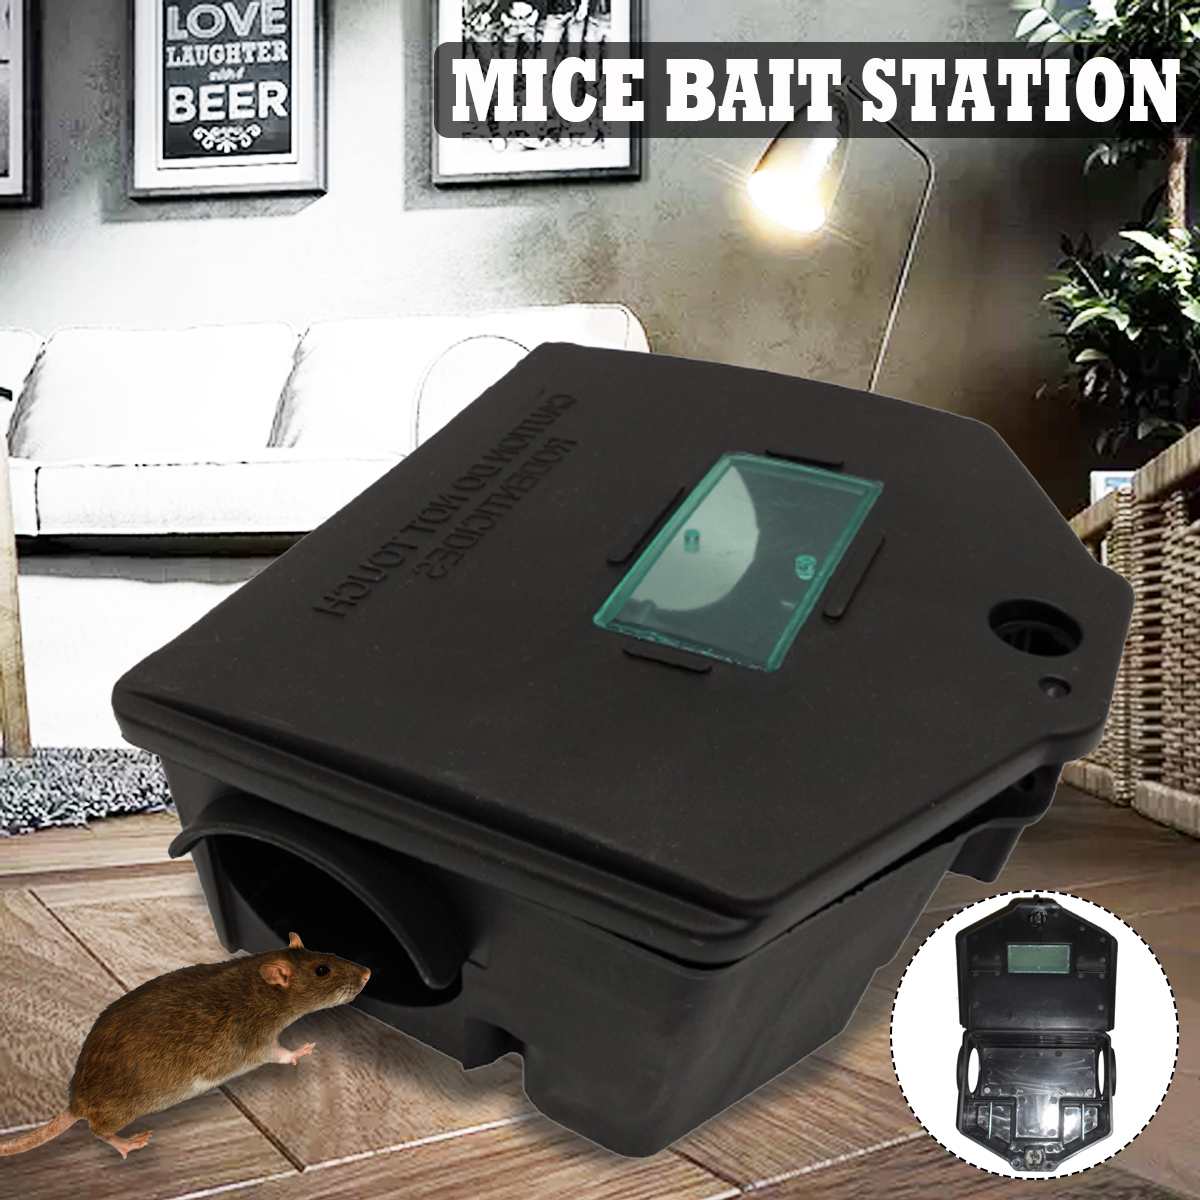 Rat Mouse Mice Rodent Bait Block Station Box Trap & Key for Home Warehouse Hotel 